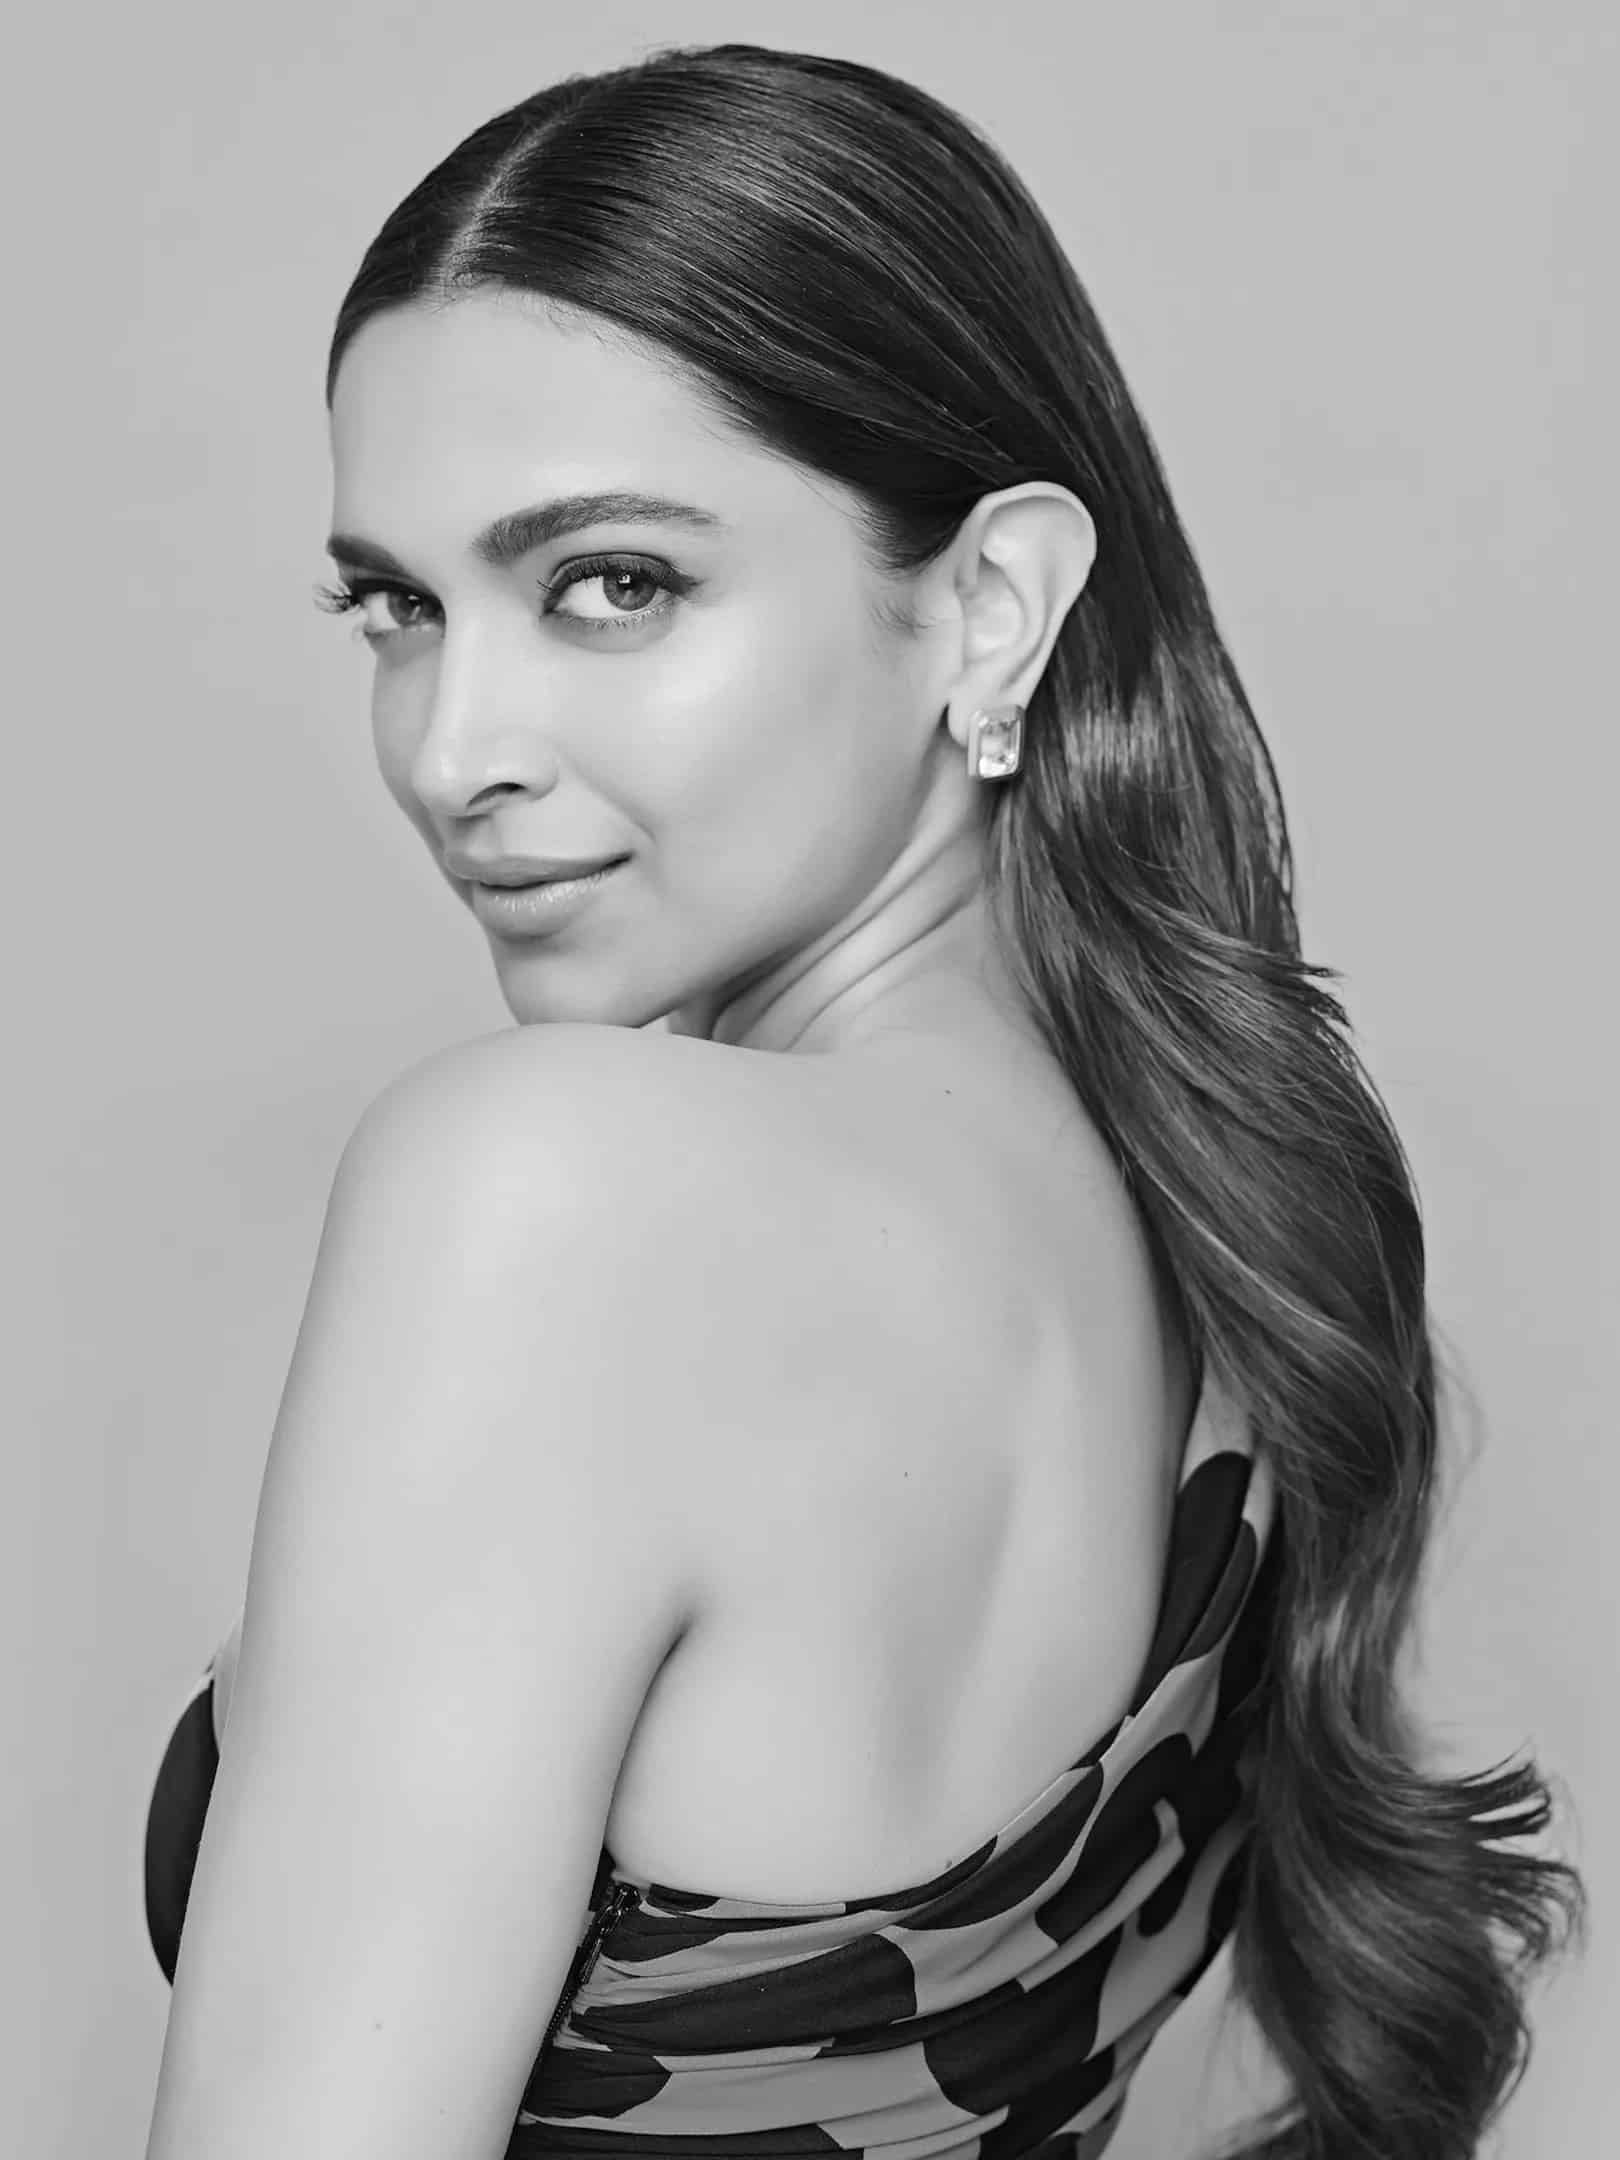 Who is Deepika Padukone, the Bollywood superstar that everyone is fighting  for?